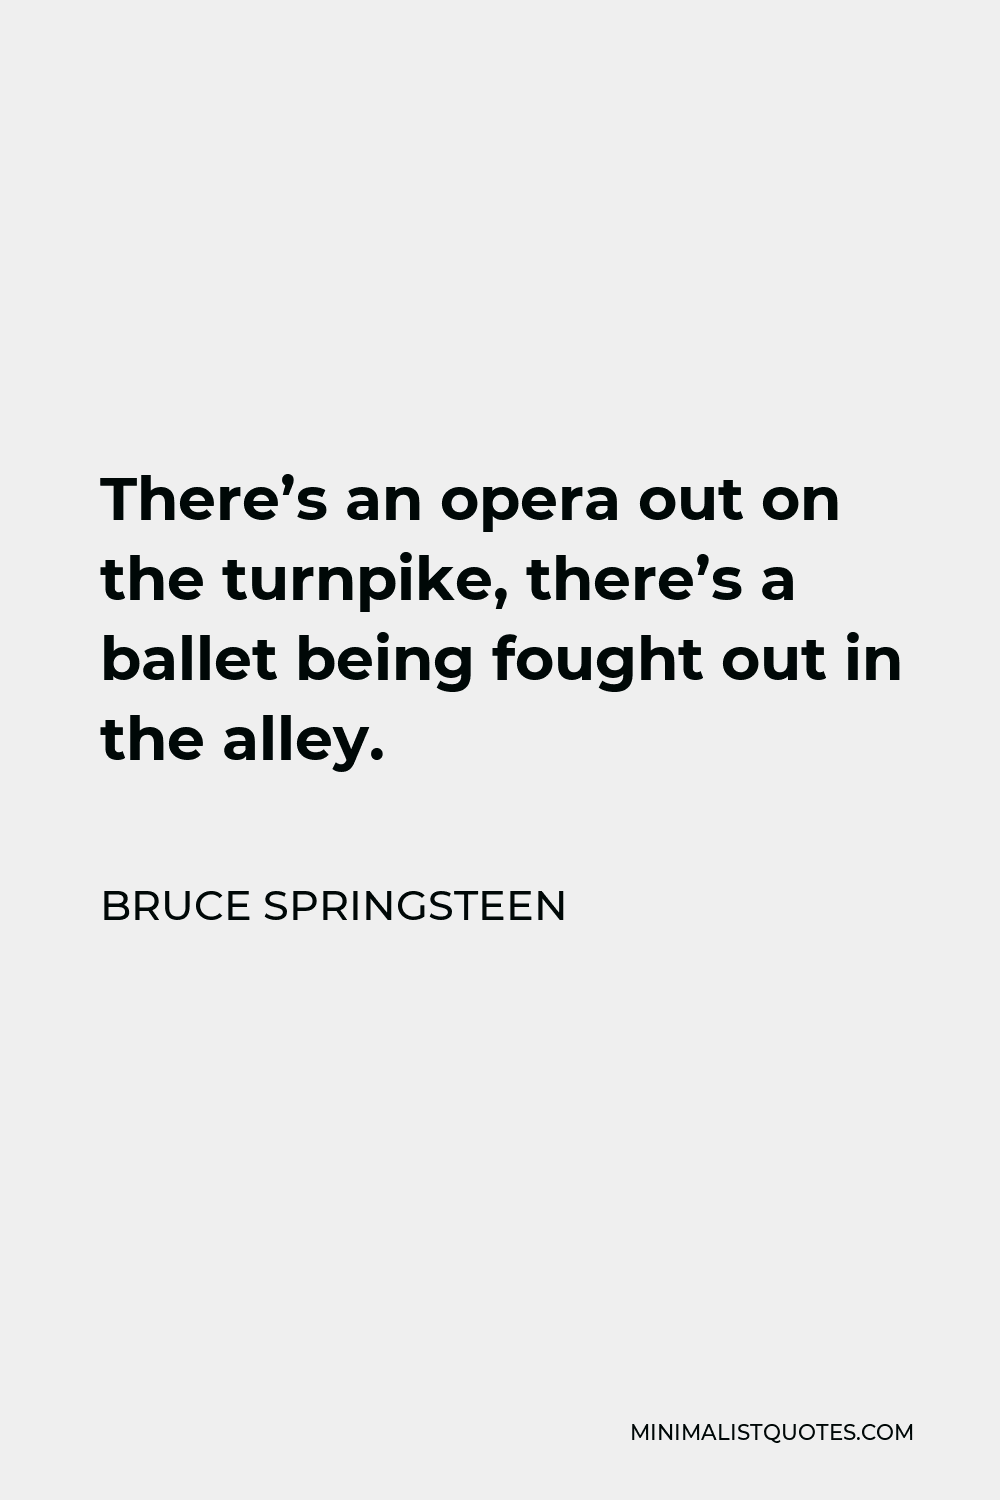 Bruce Springsteen Quote - There’s an opera out on the turnpike, there’s a ballet being fought out in the alley.